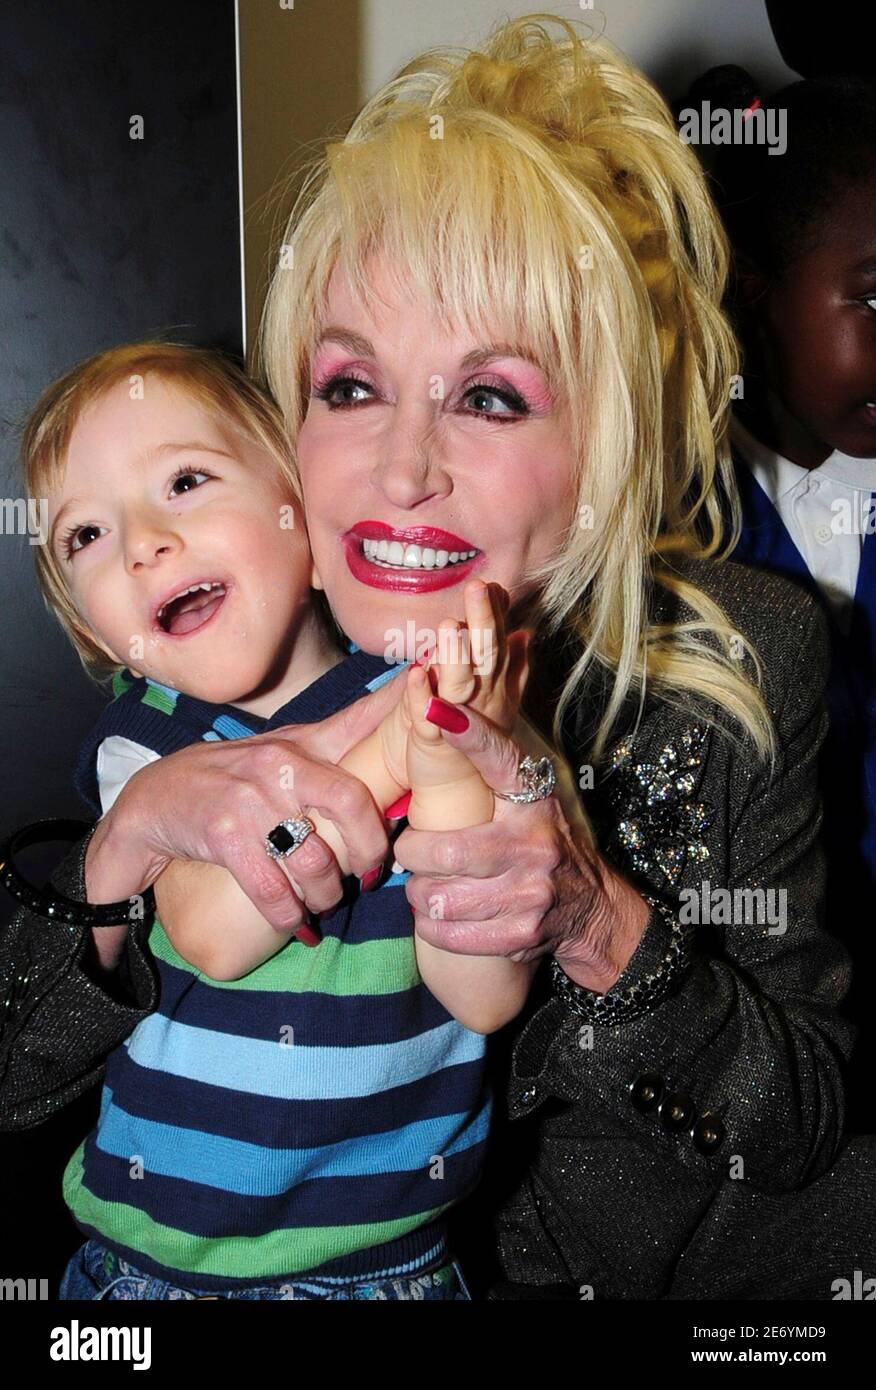 U.S. singer Dolly Parton (R) plays with a child during the launch of her Imagination  Library book project at the Magna Centre in Sheffield in northern England  December 5, 2007. Parton's Imagination